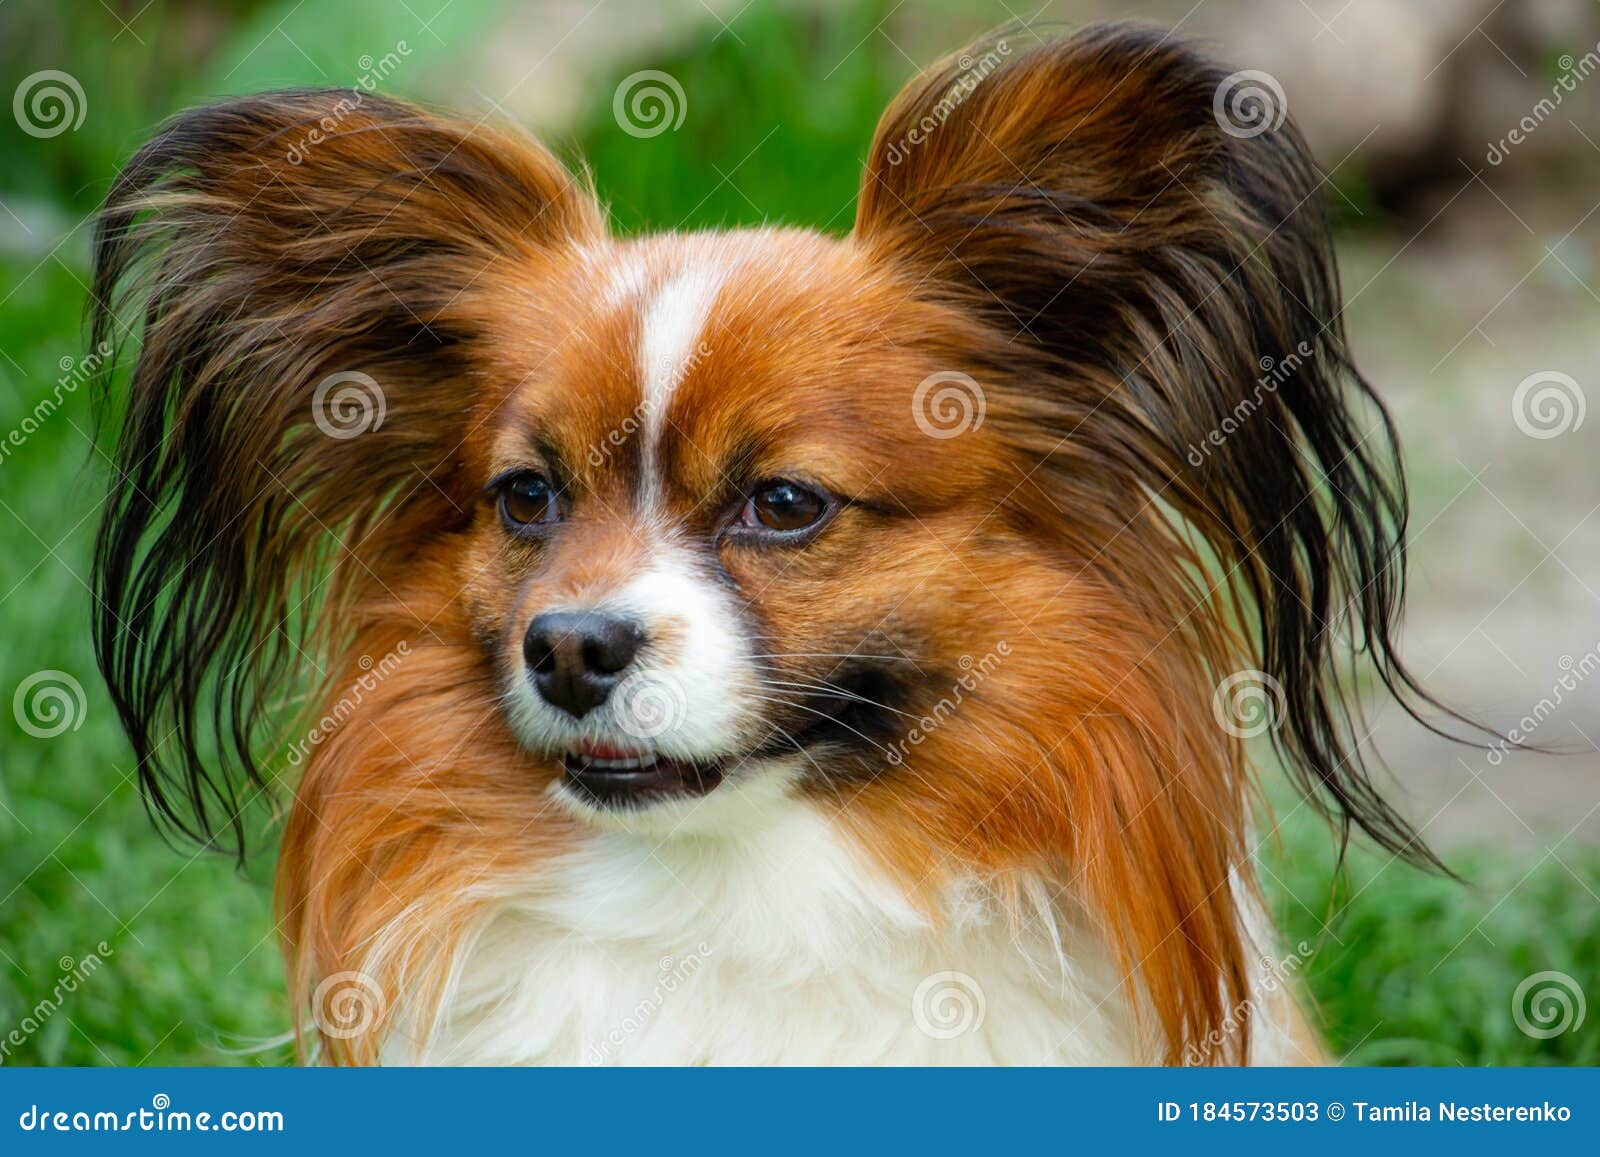 Beautiful Cute Papillon Dog Shows Us The Tongue Portrait Gullible Look Butterfly Like Ears Colors Brown Red White Stock Image Image Of Black Fluffy 184573503